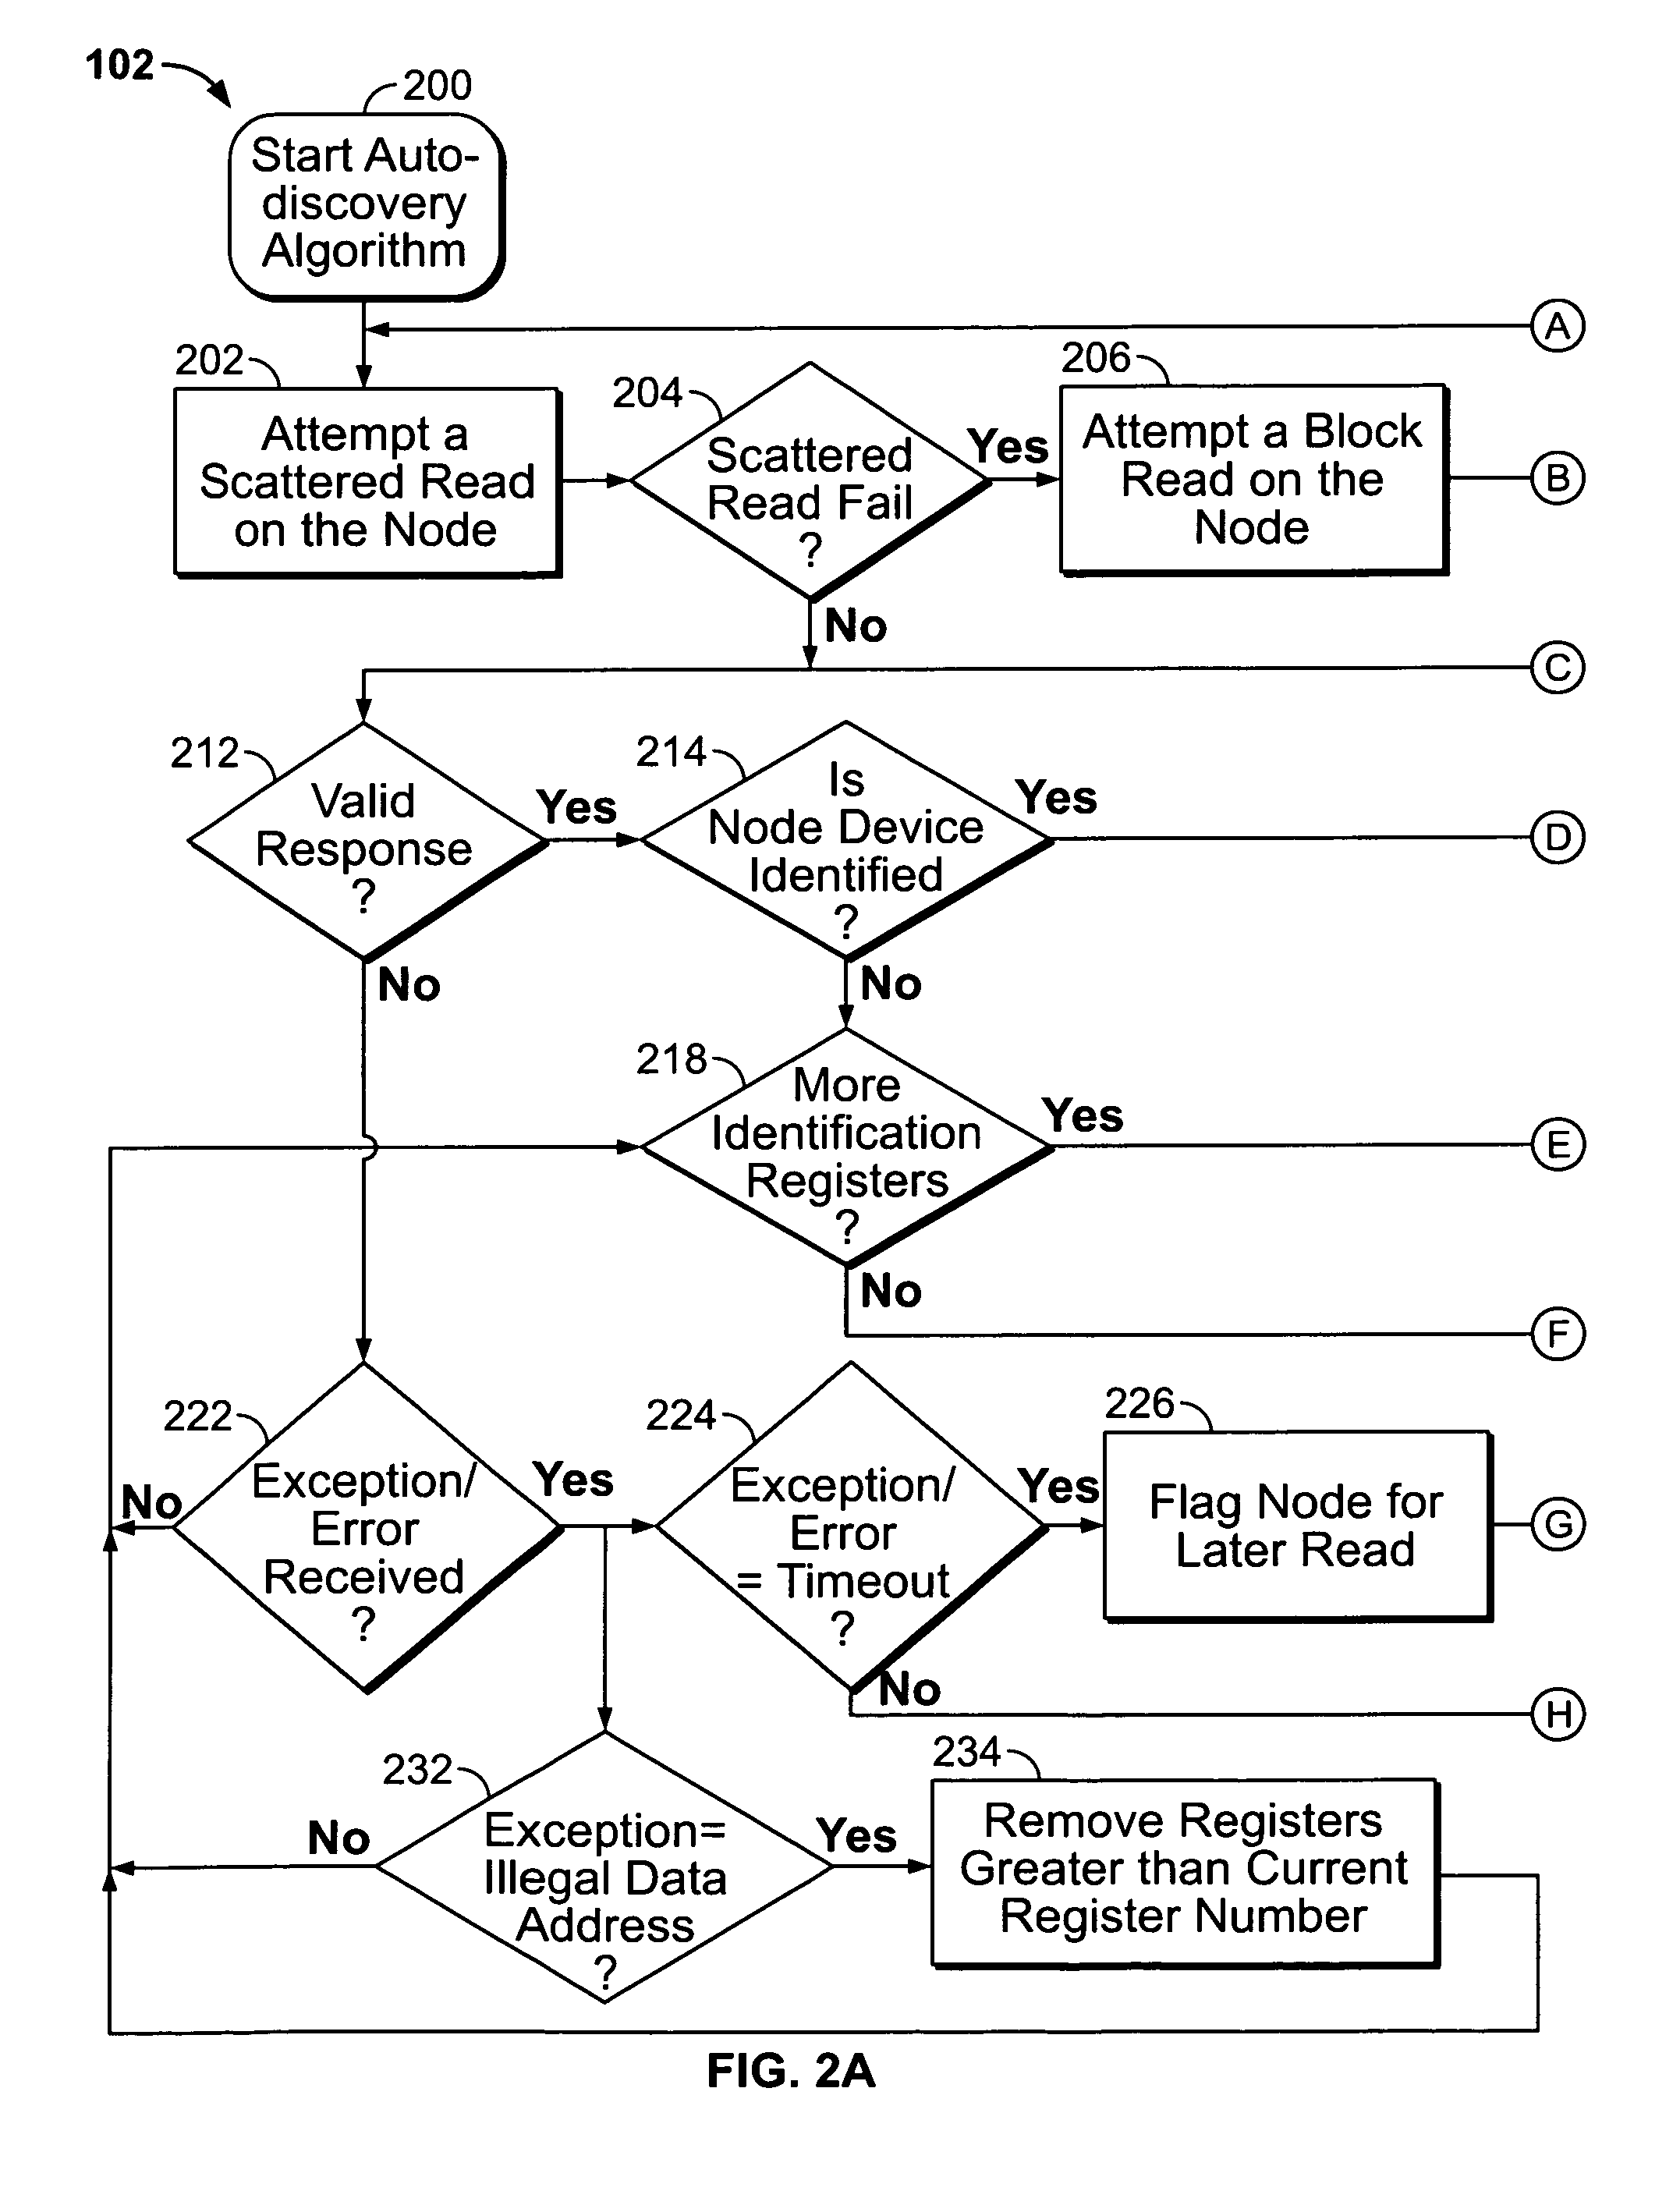 Automated discovery of devices in large utility monitoring systems